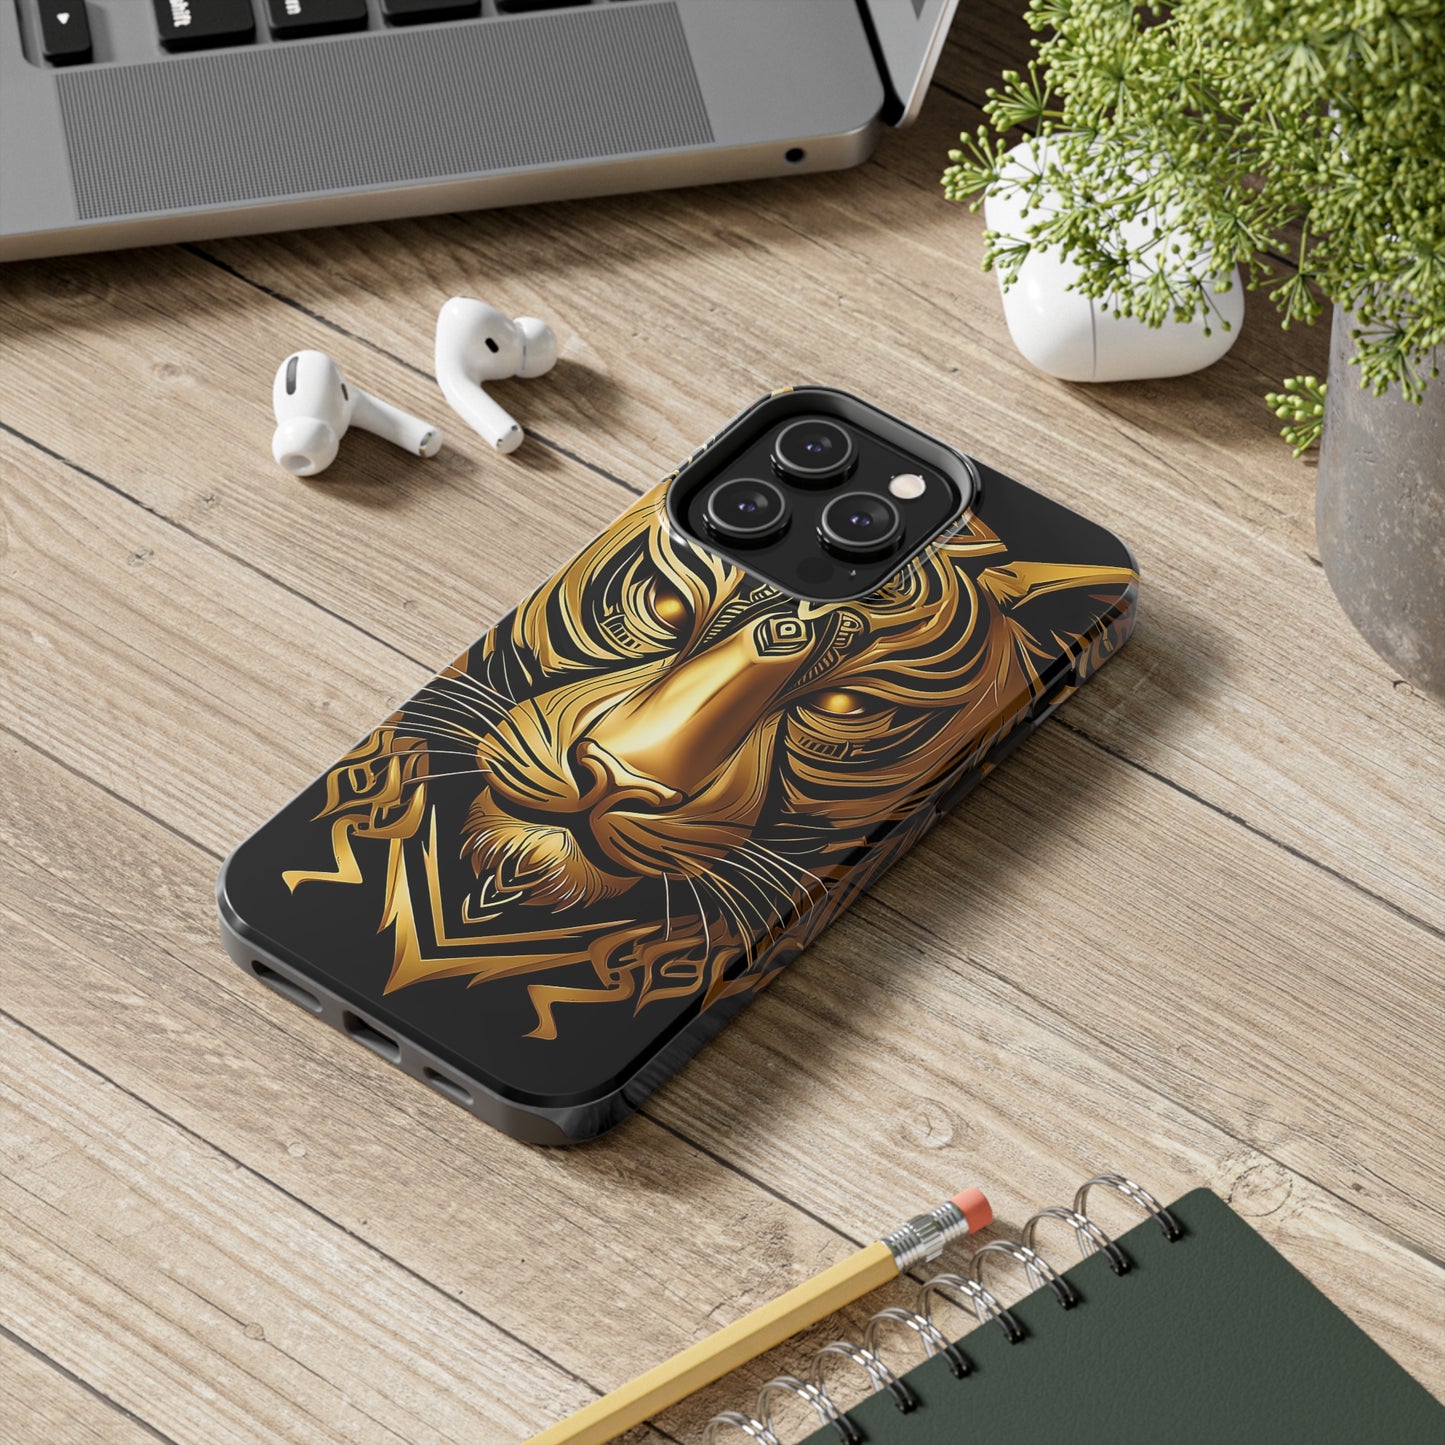 Big Cat Themed iPhone 14 Tough Case - Gold Tribal Tiger Head Printed on Phone Case for iPhone 14 Pro Max on desk